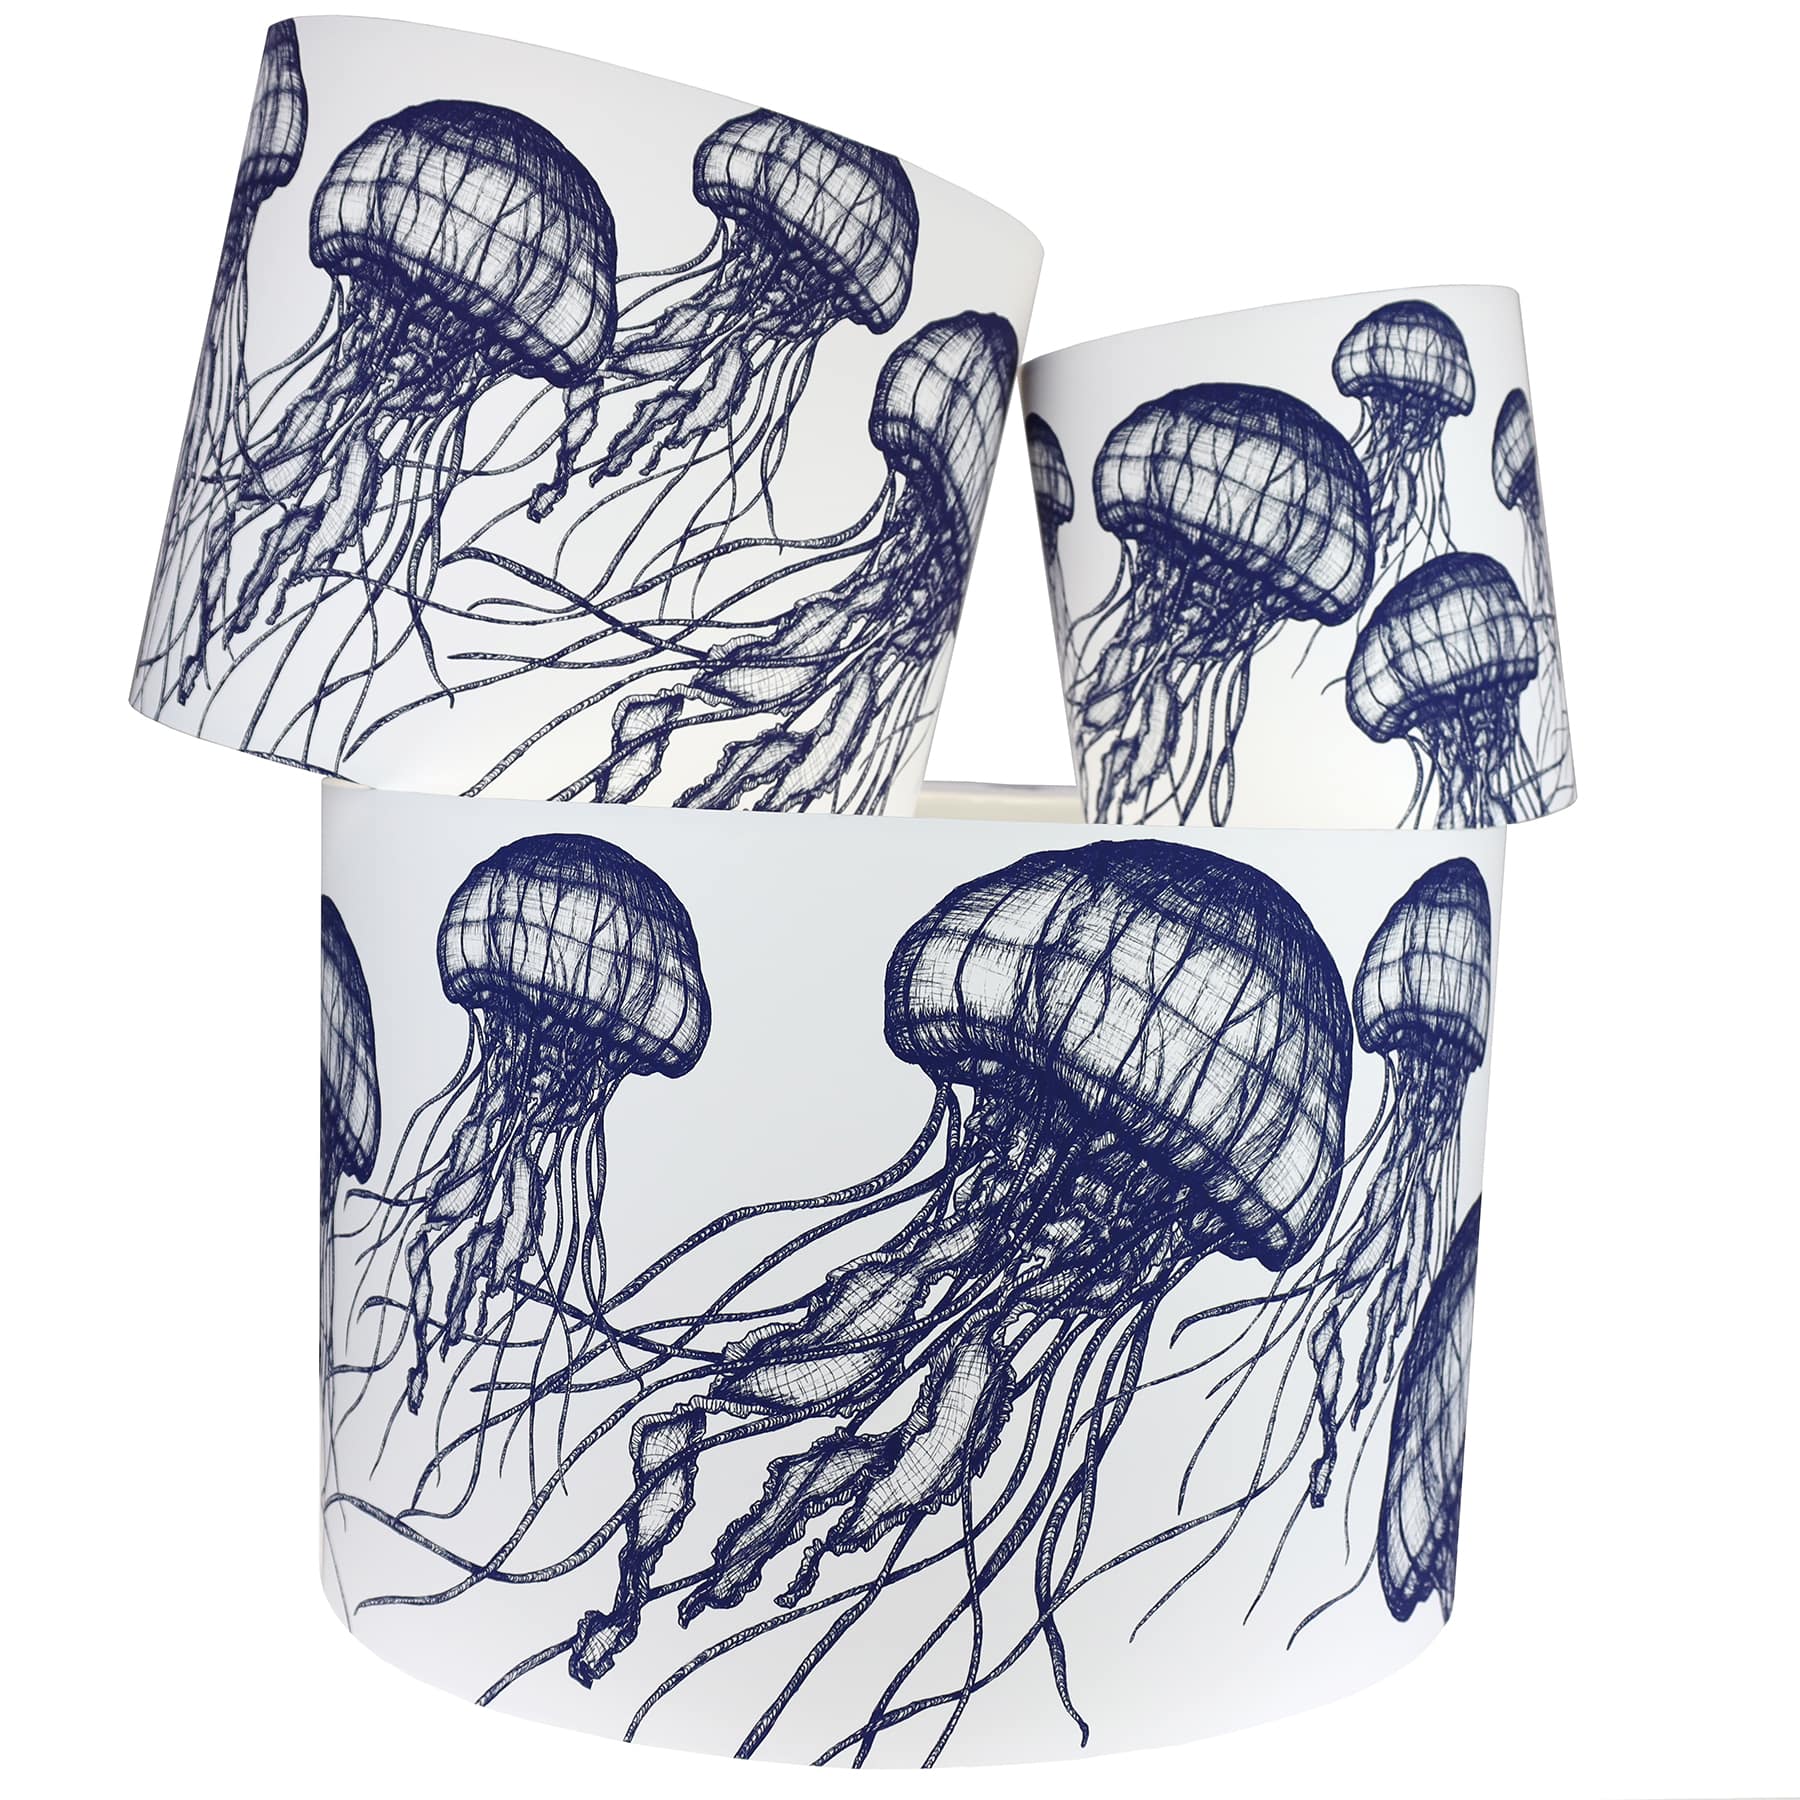 Our Classic Navy jellyfish design on a white background.The lampshades are shown in a stack of three showing all three sizes.